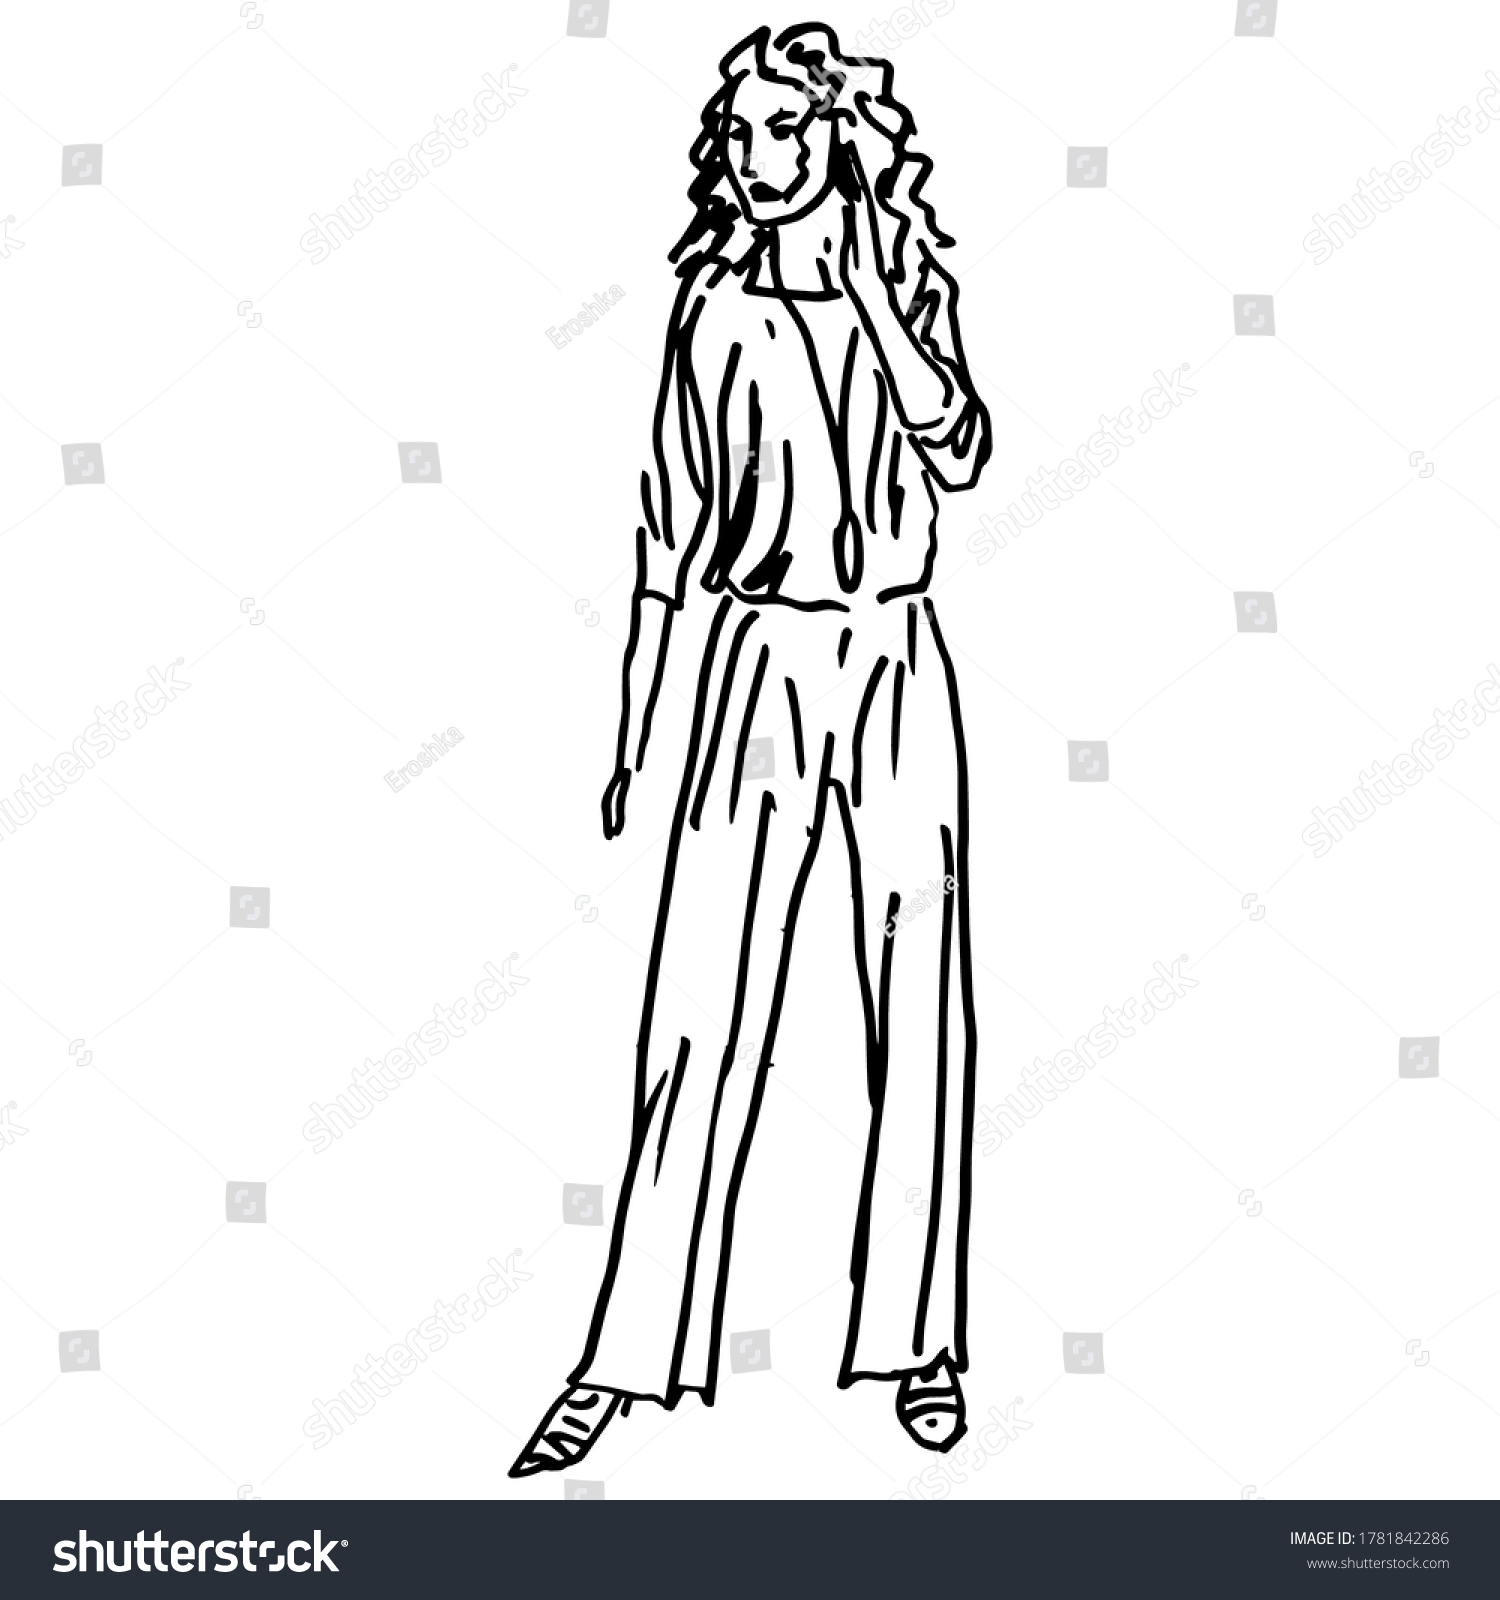 Standing Young Woman Pantsuit Hand Drawn Stock Vector Royalty Free 1781842286 Shutterstock 